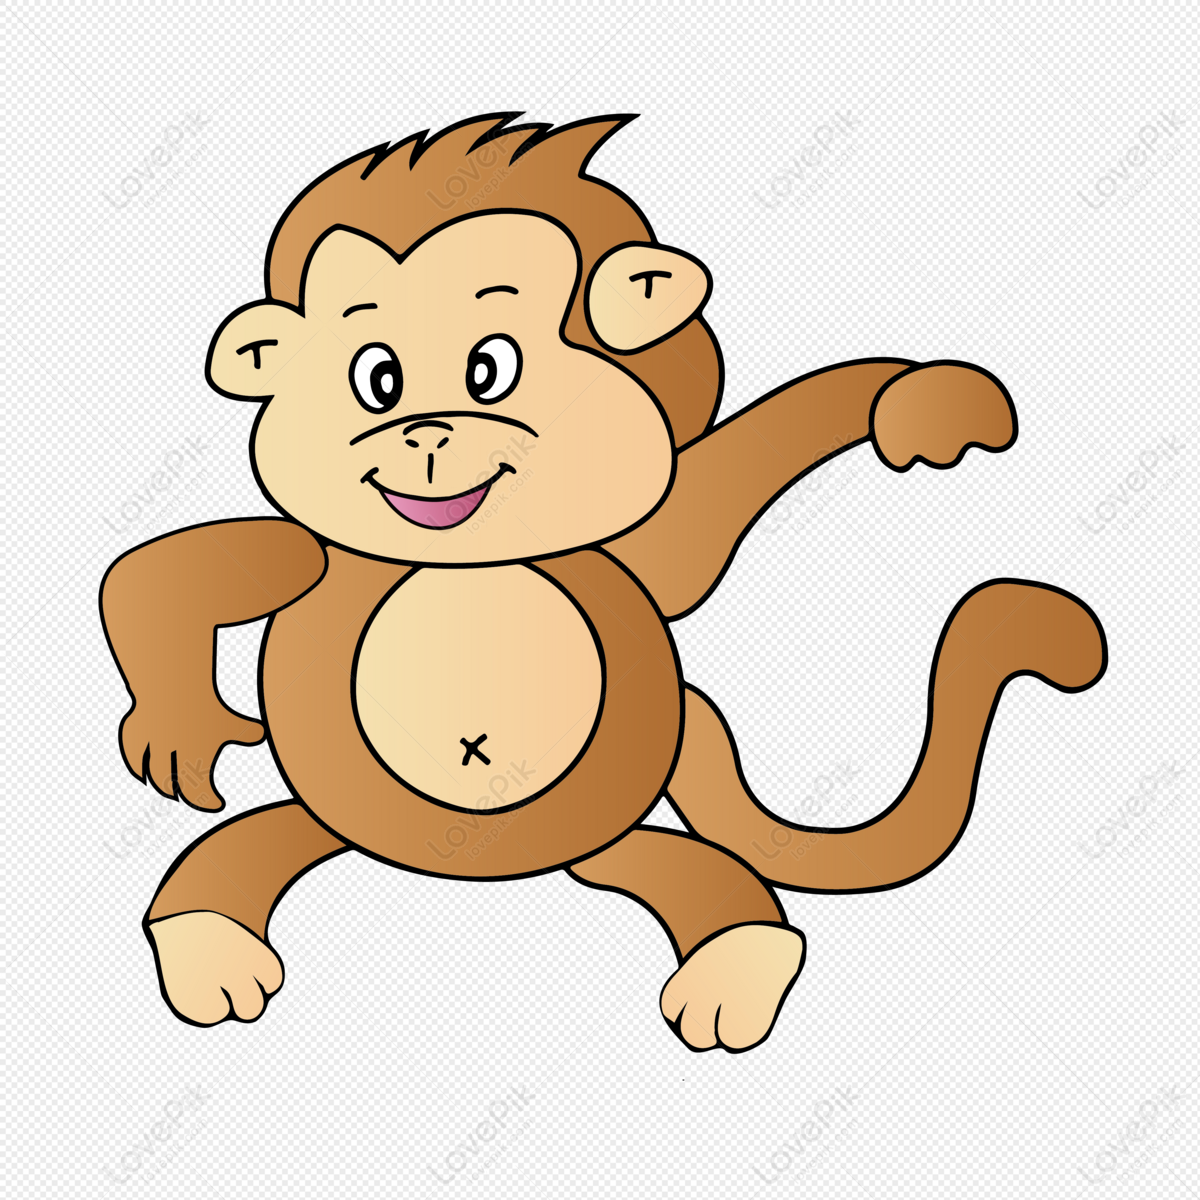 Hand Drawn Cartoon Dancing Monkey PNG Transparent Background And Clipart  Image For Free Download - Lovepik | 401312790